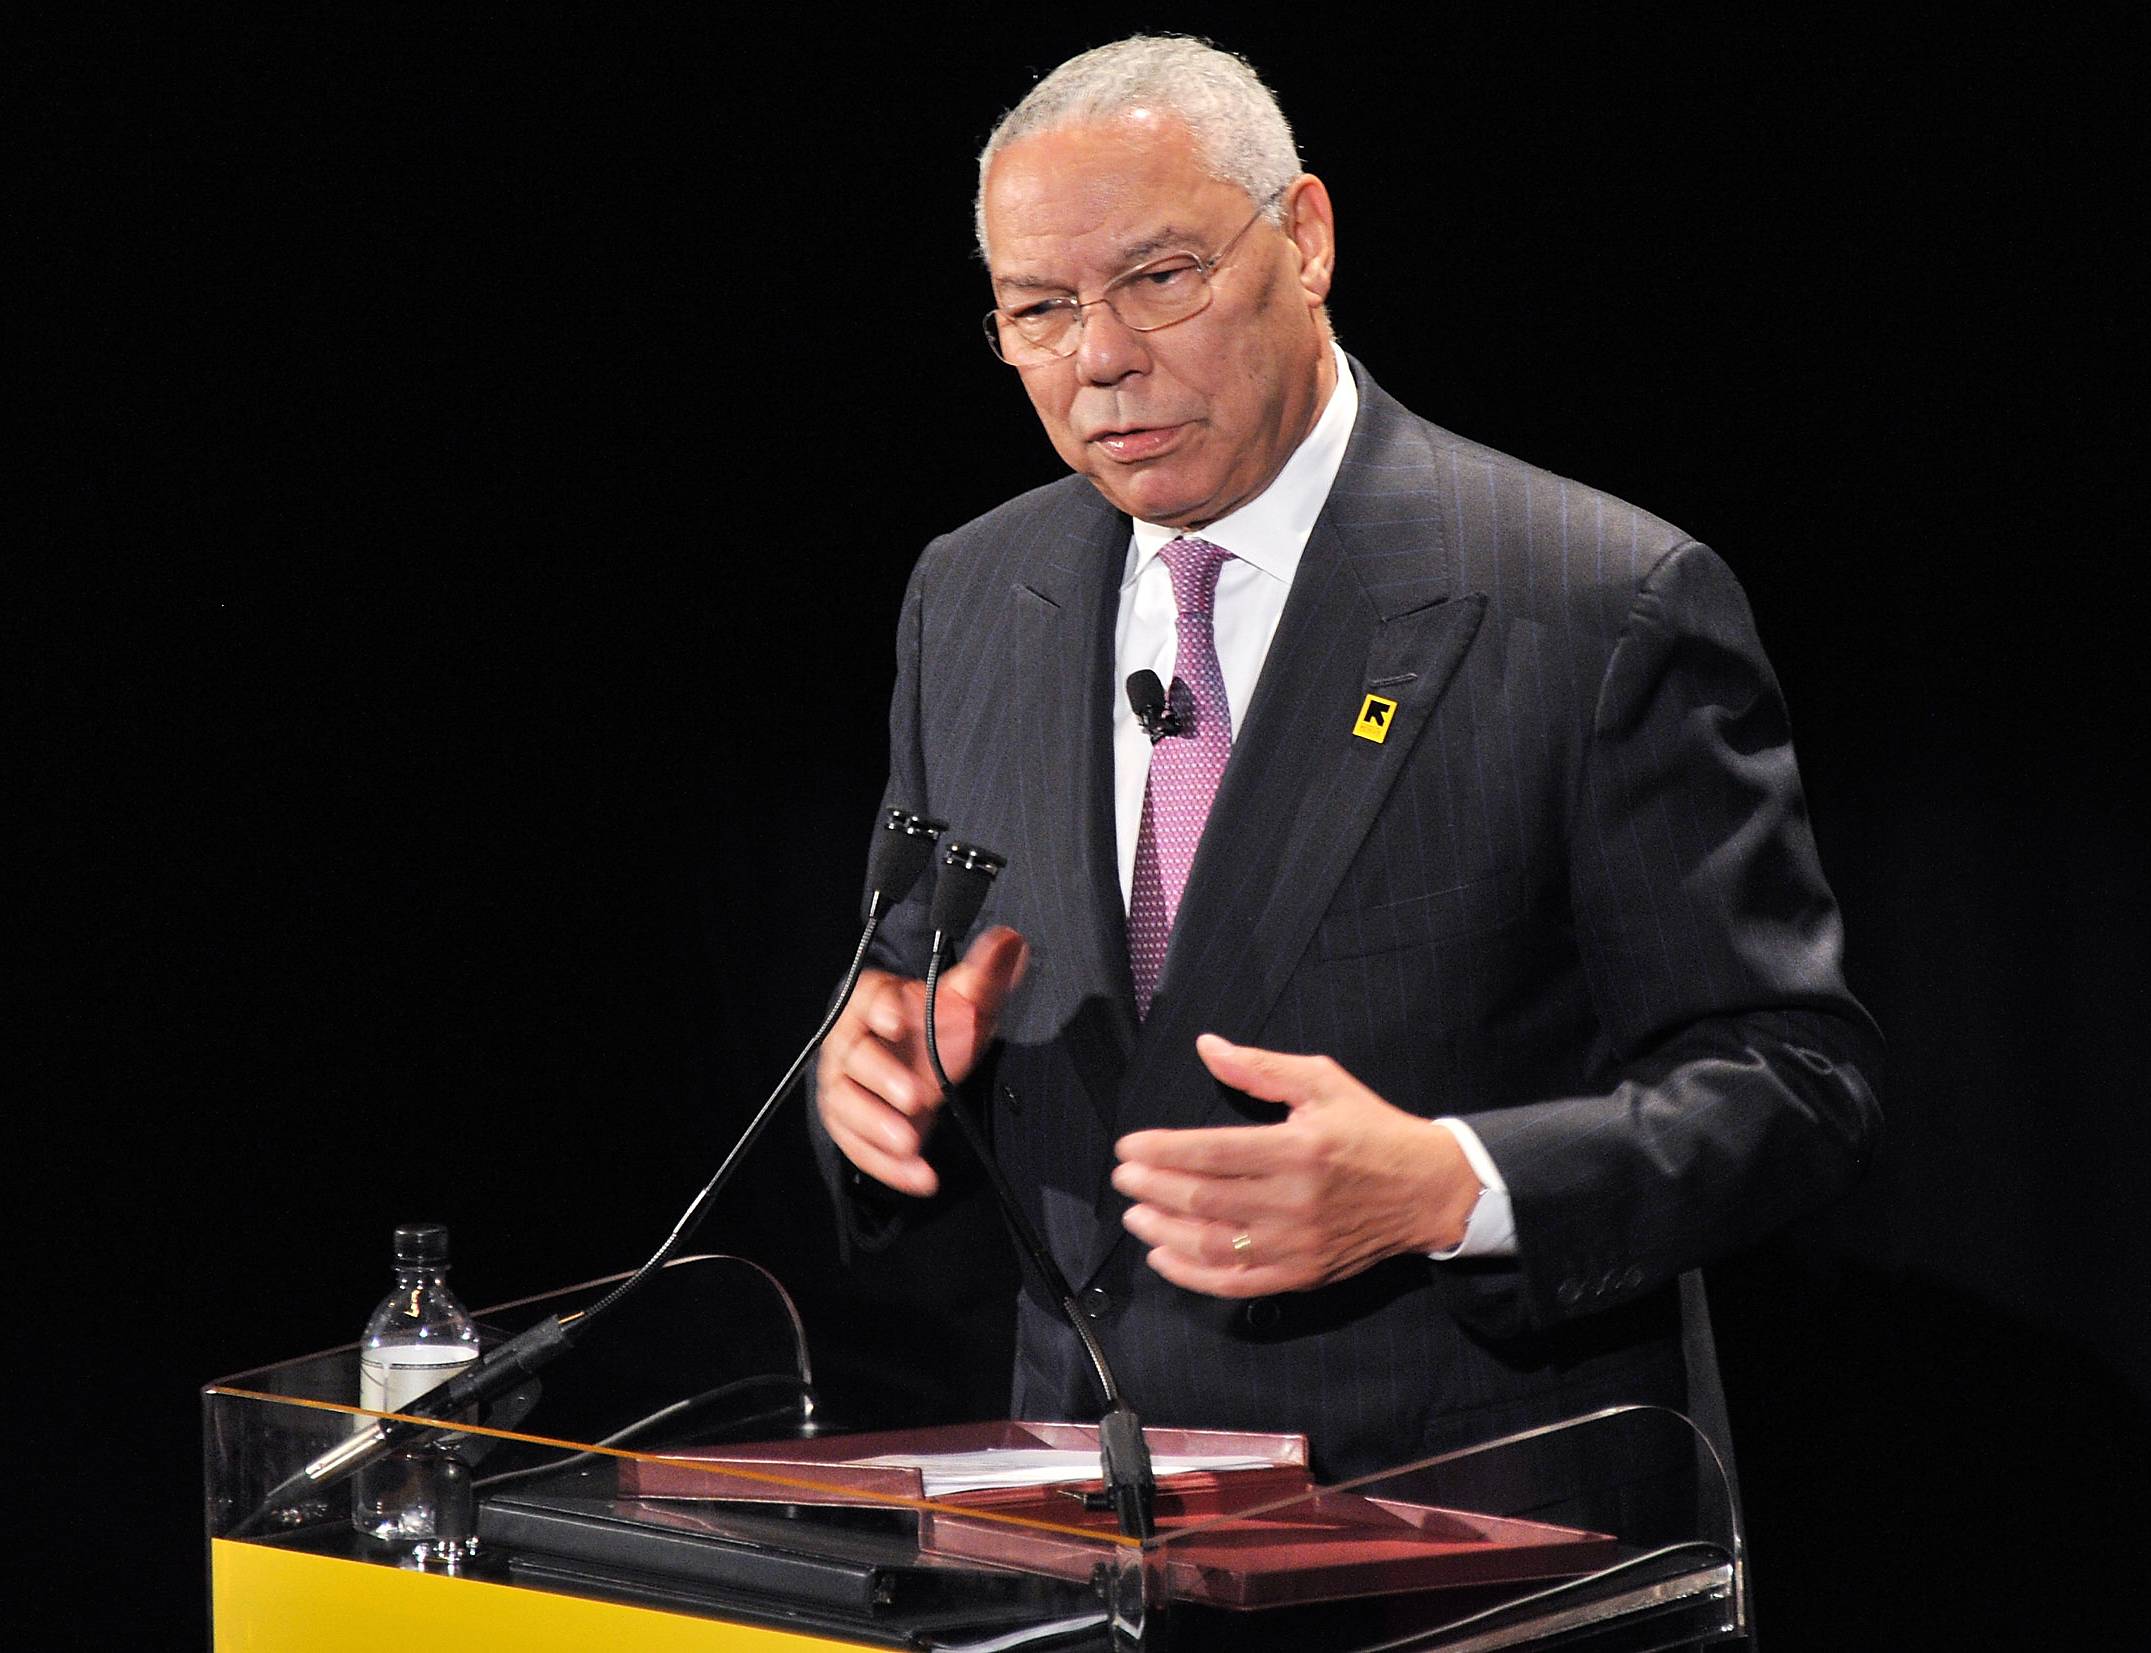 Colin Powell - Gen. Colin Powell has racked up a series of impressive firsts over his lifetime on his own merits and as a member of the Republican Party. Some may consider him a traitor for having the courage to endorse Barack Obama in the 2008 presidential election, but it’s that courage that has made him one of the nation’s most highly respected Republicans among people of all ideologies.(Photo: Stephen Lovekin/Getty Images for IRC)